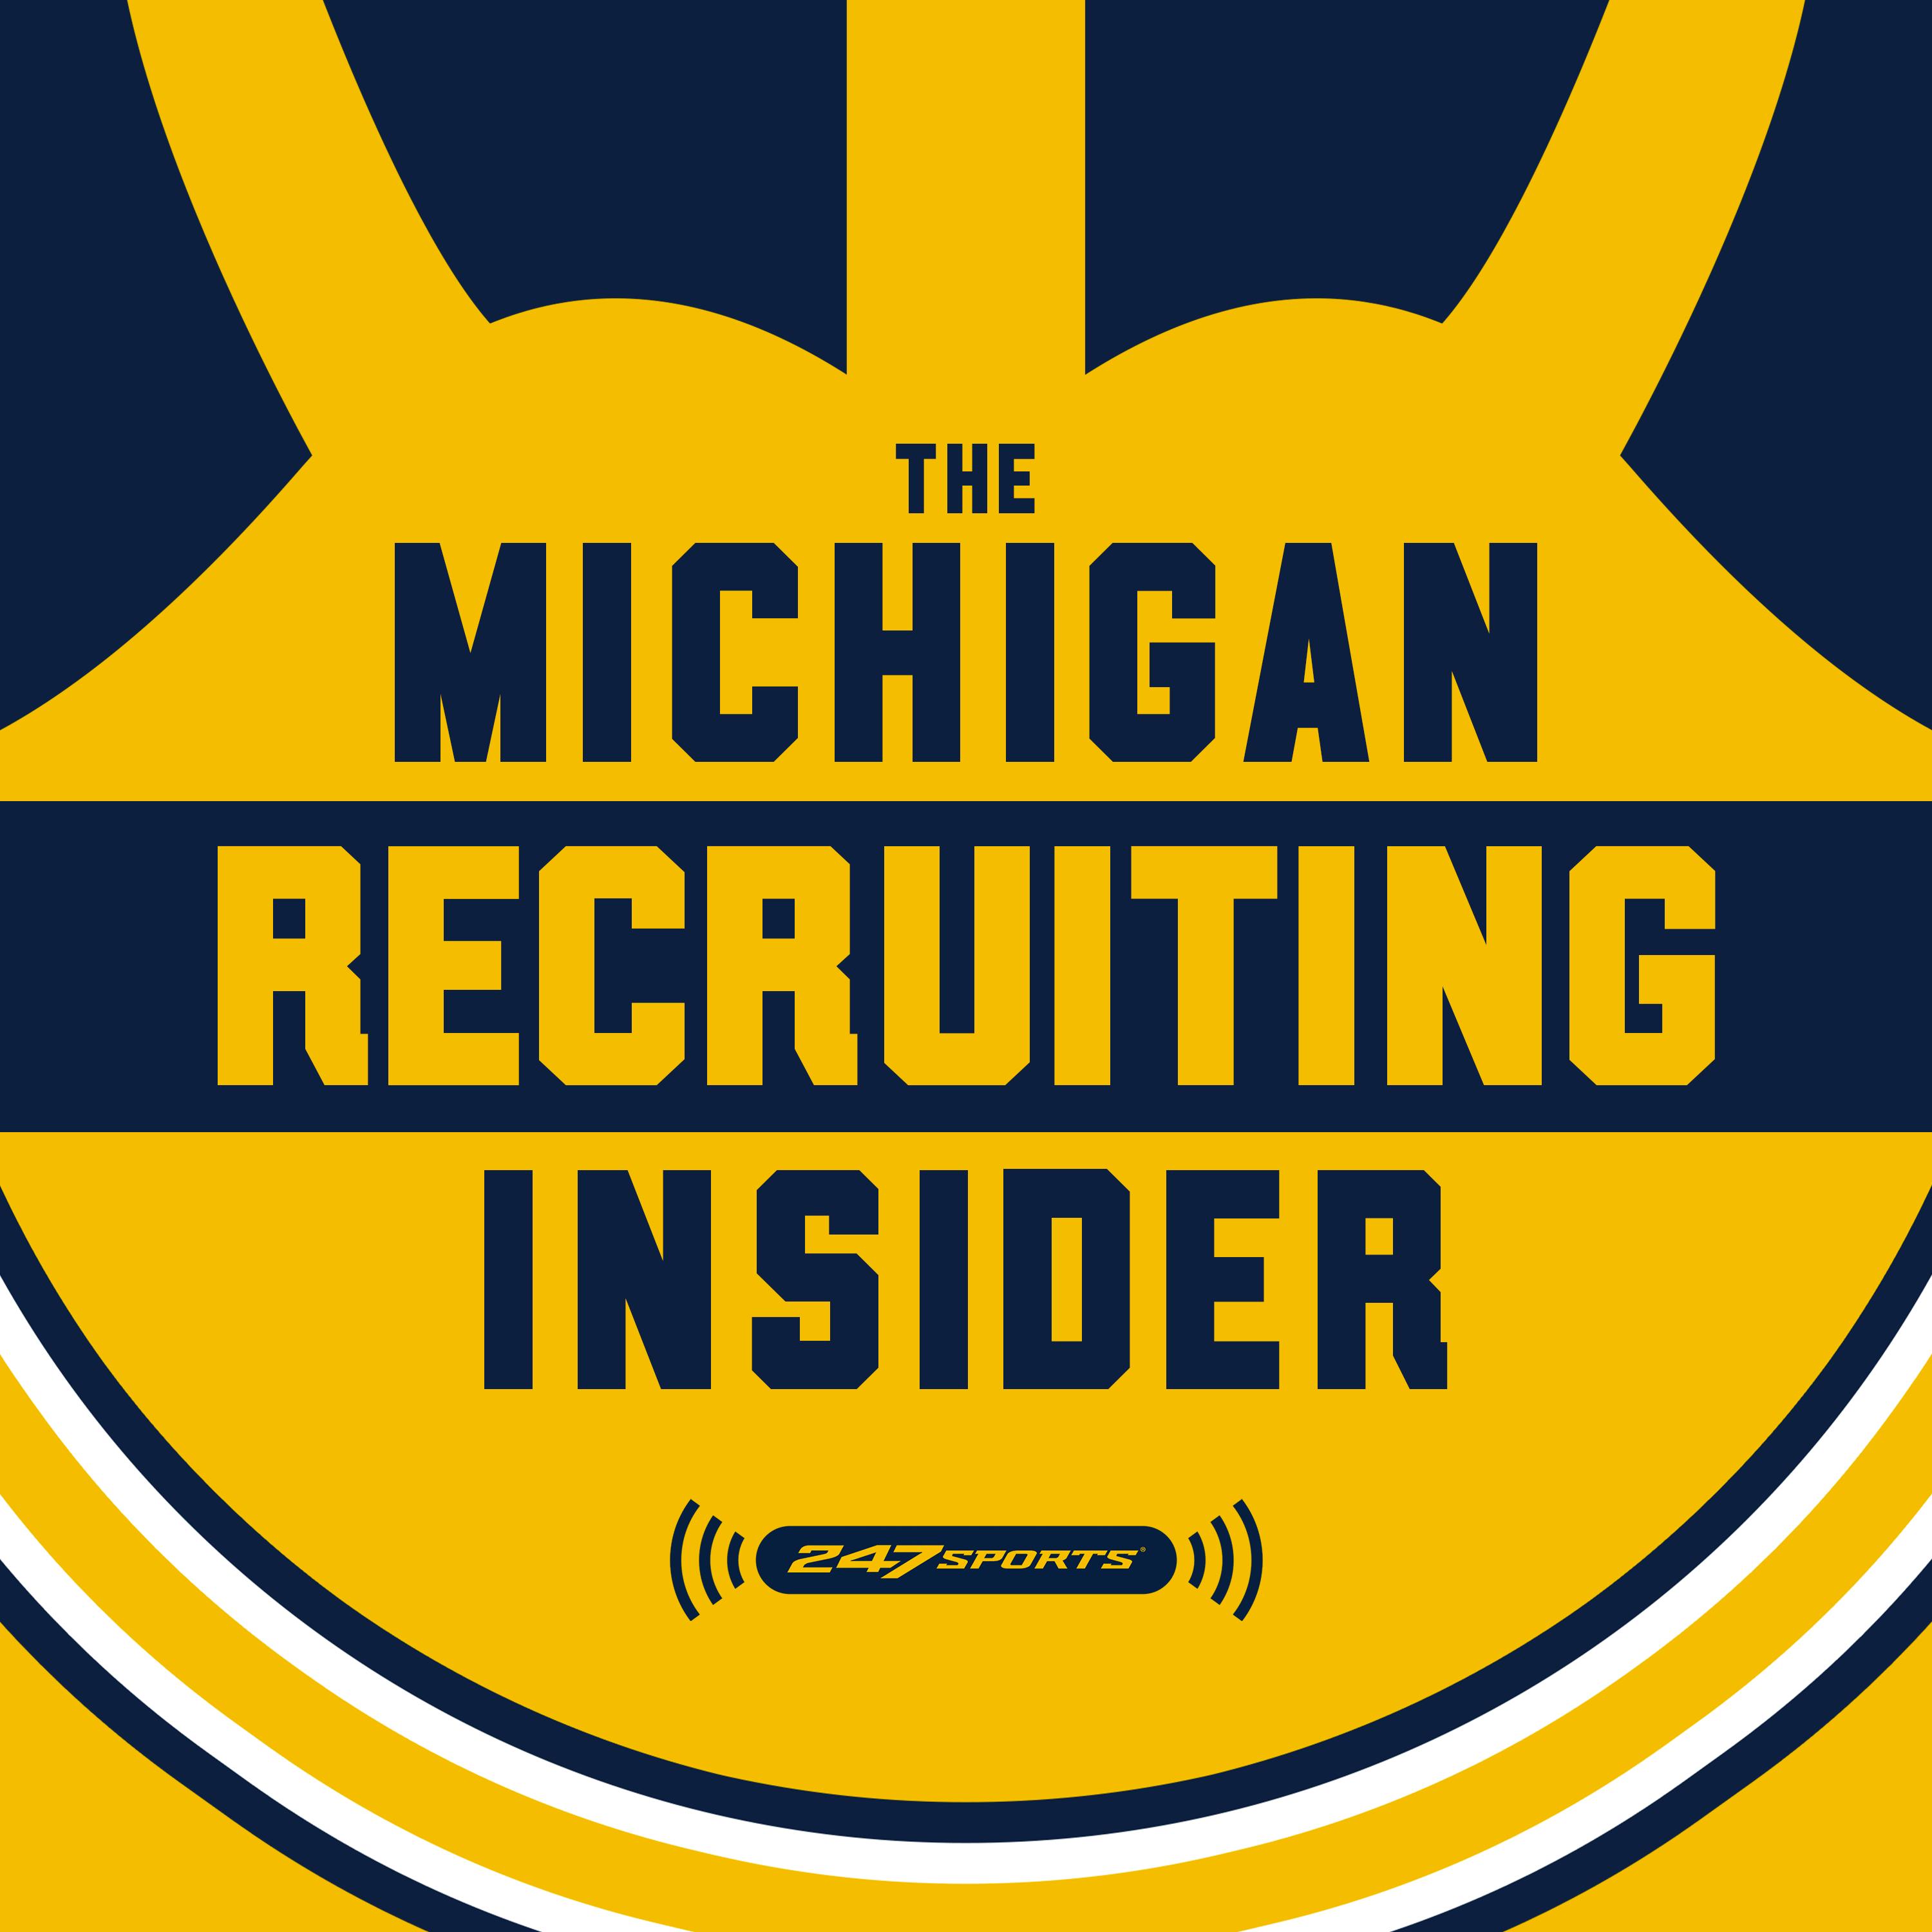 After landing two more big fish; Michigan aiming for whale - Michigan Recruiting Insider